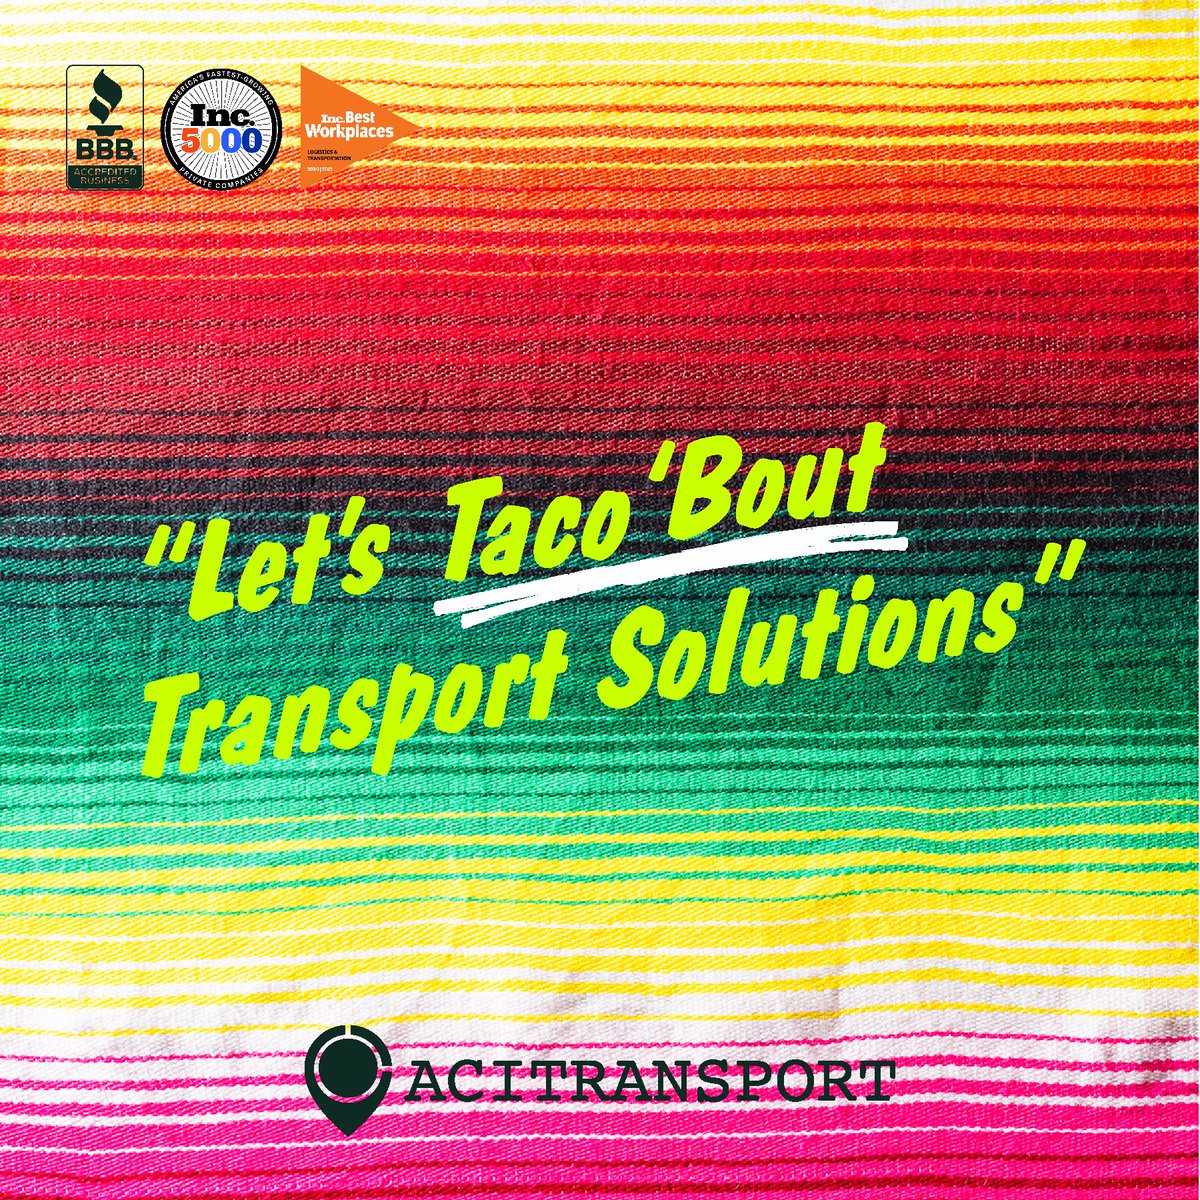 It's Cinco de Mayo and we're ready to taco 'bout transportation solutions! Visit zurl.co/8rqq to learn more! #ACITransport #shipmycar #militarymove #CarTransport #NationwideShipping #TransportationSolutions #CincoDeMayo #LetsTalk #truckloadstrong #CarrierPartnership